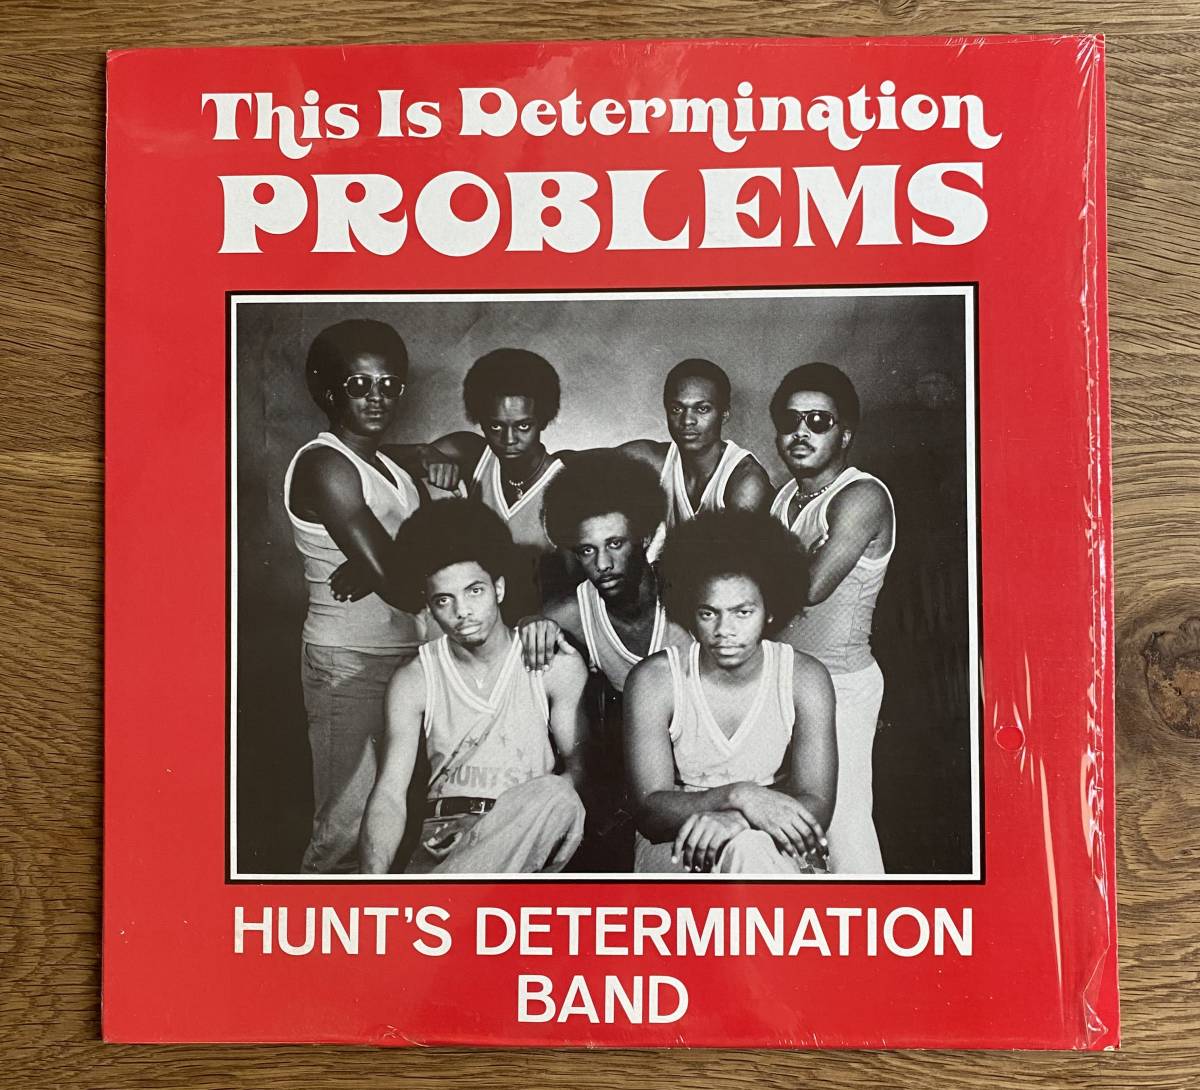 USオリジナル盤　HUNT'S DETERMINATION BAND / This Is Determination Problems 1978 RARE GROOVE FUNK シュリンク_画像1